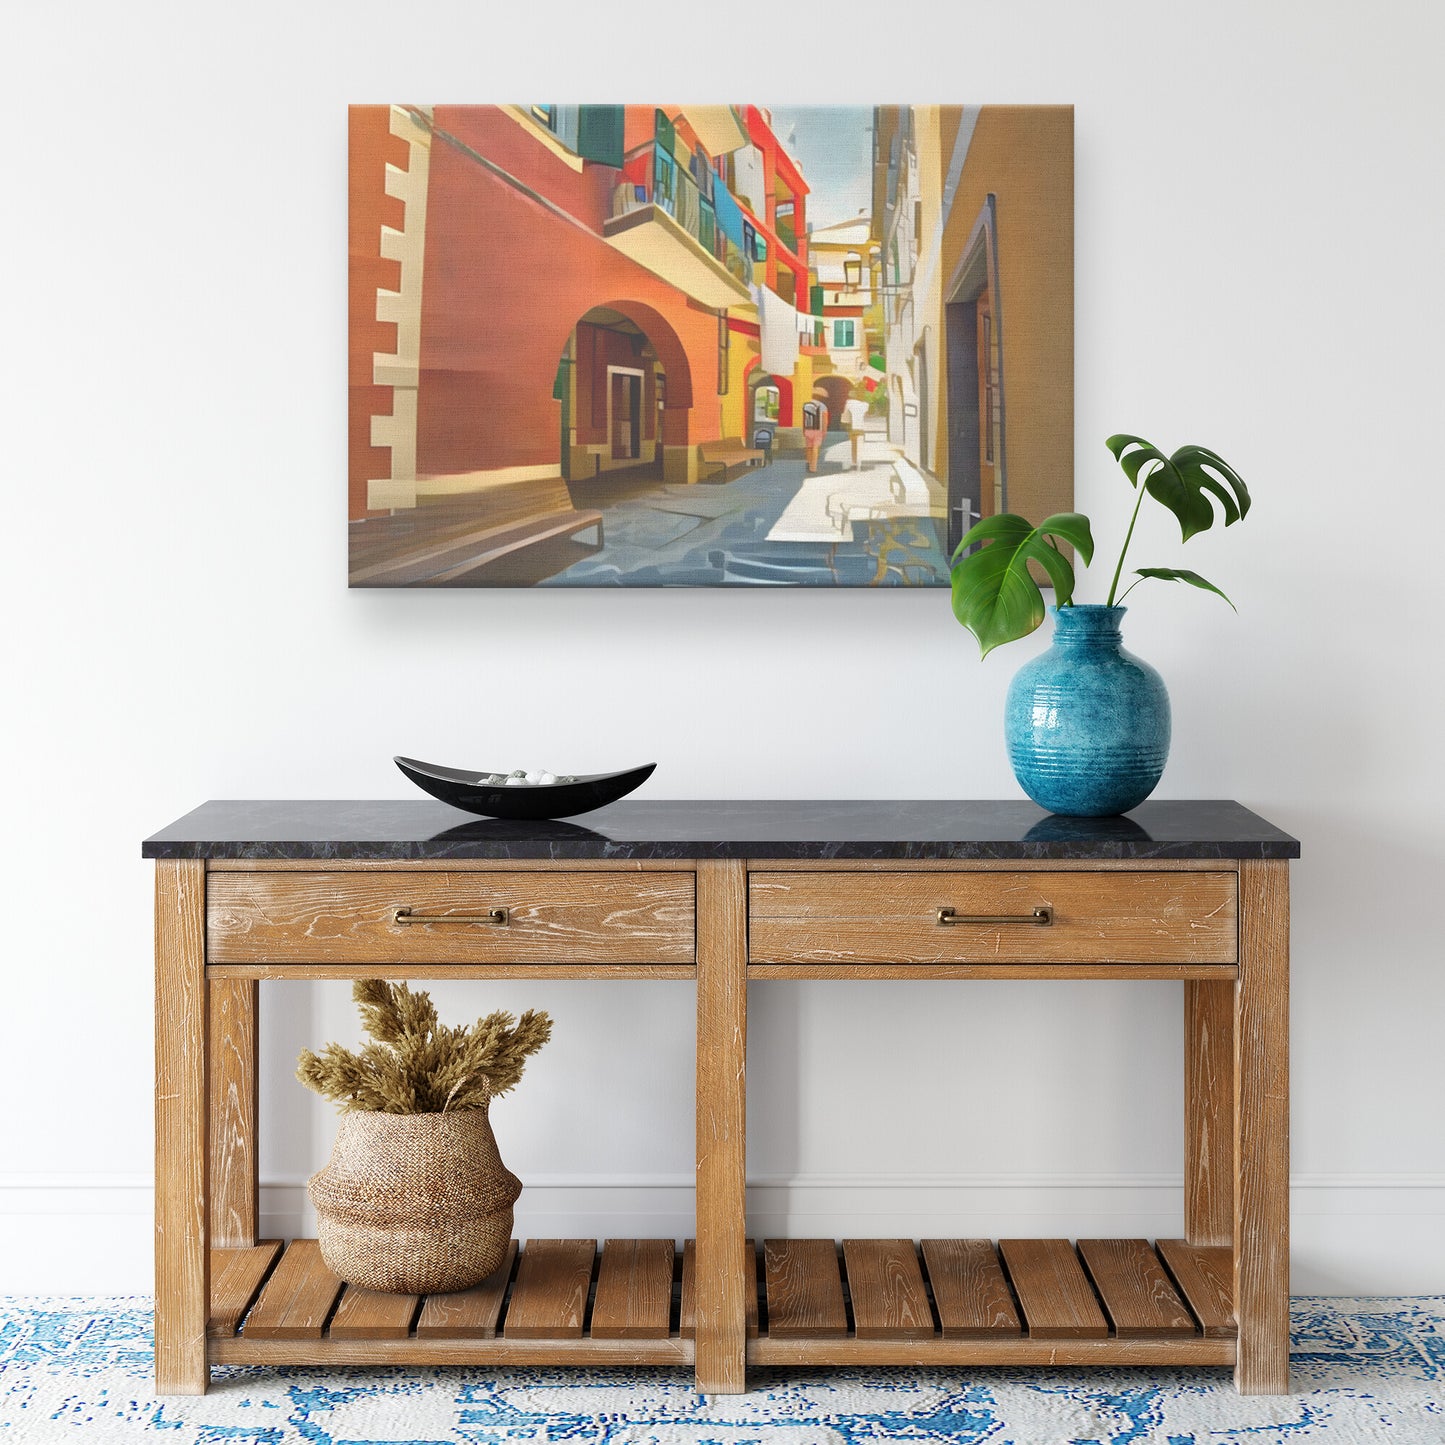 Monterosso Painting, Italy Alley, Cinque Terre Canvas, AI Art